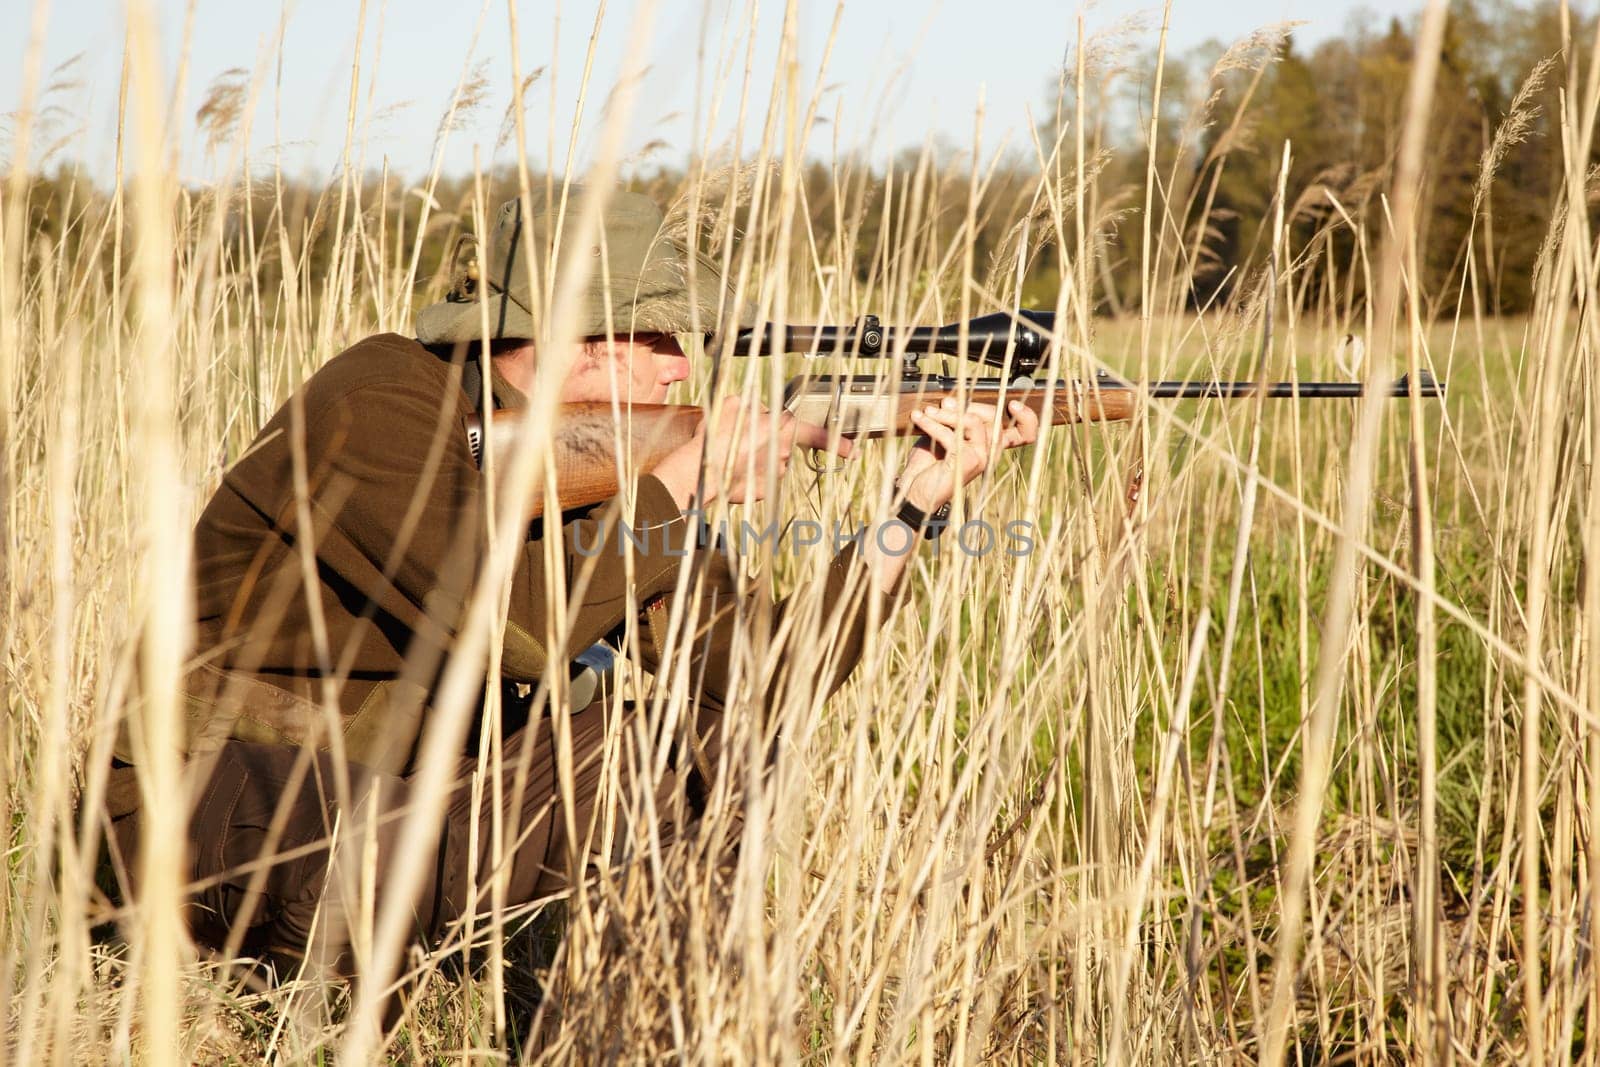 Nature, hunter and man with a rifle while in camouflage shooting in outdoor field. Grass, wildlife and male sniper hunting animals with shotgun weapon hiding in plants to shoot target in countryside